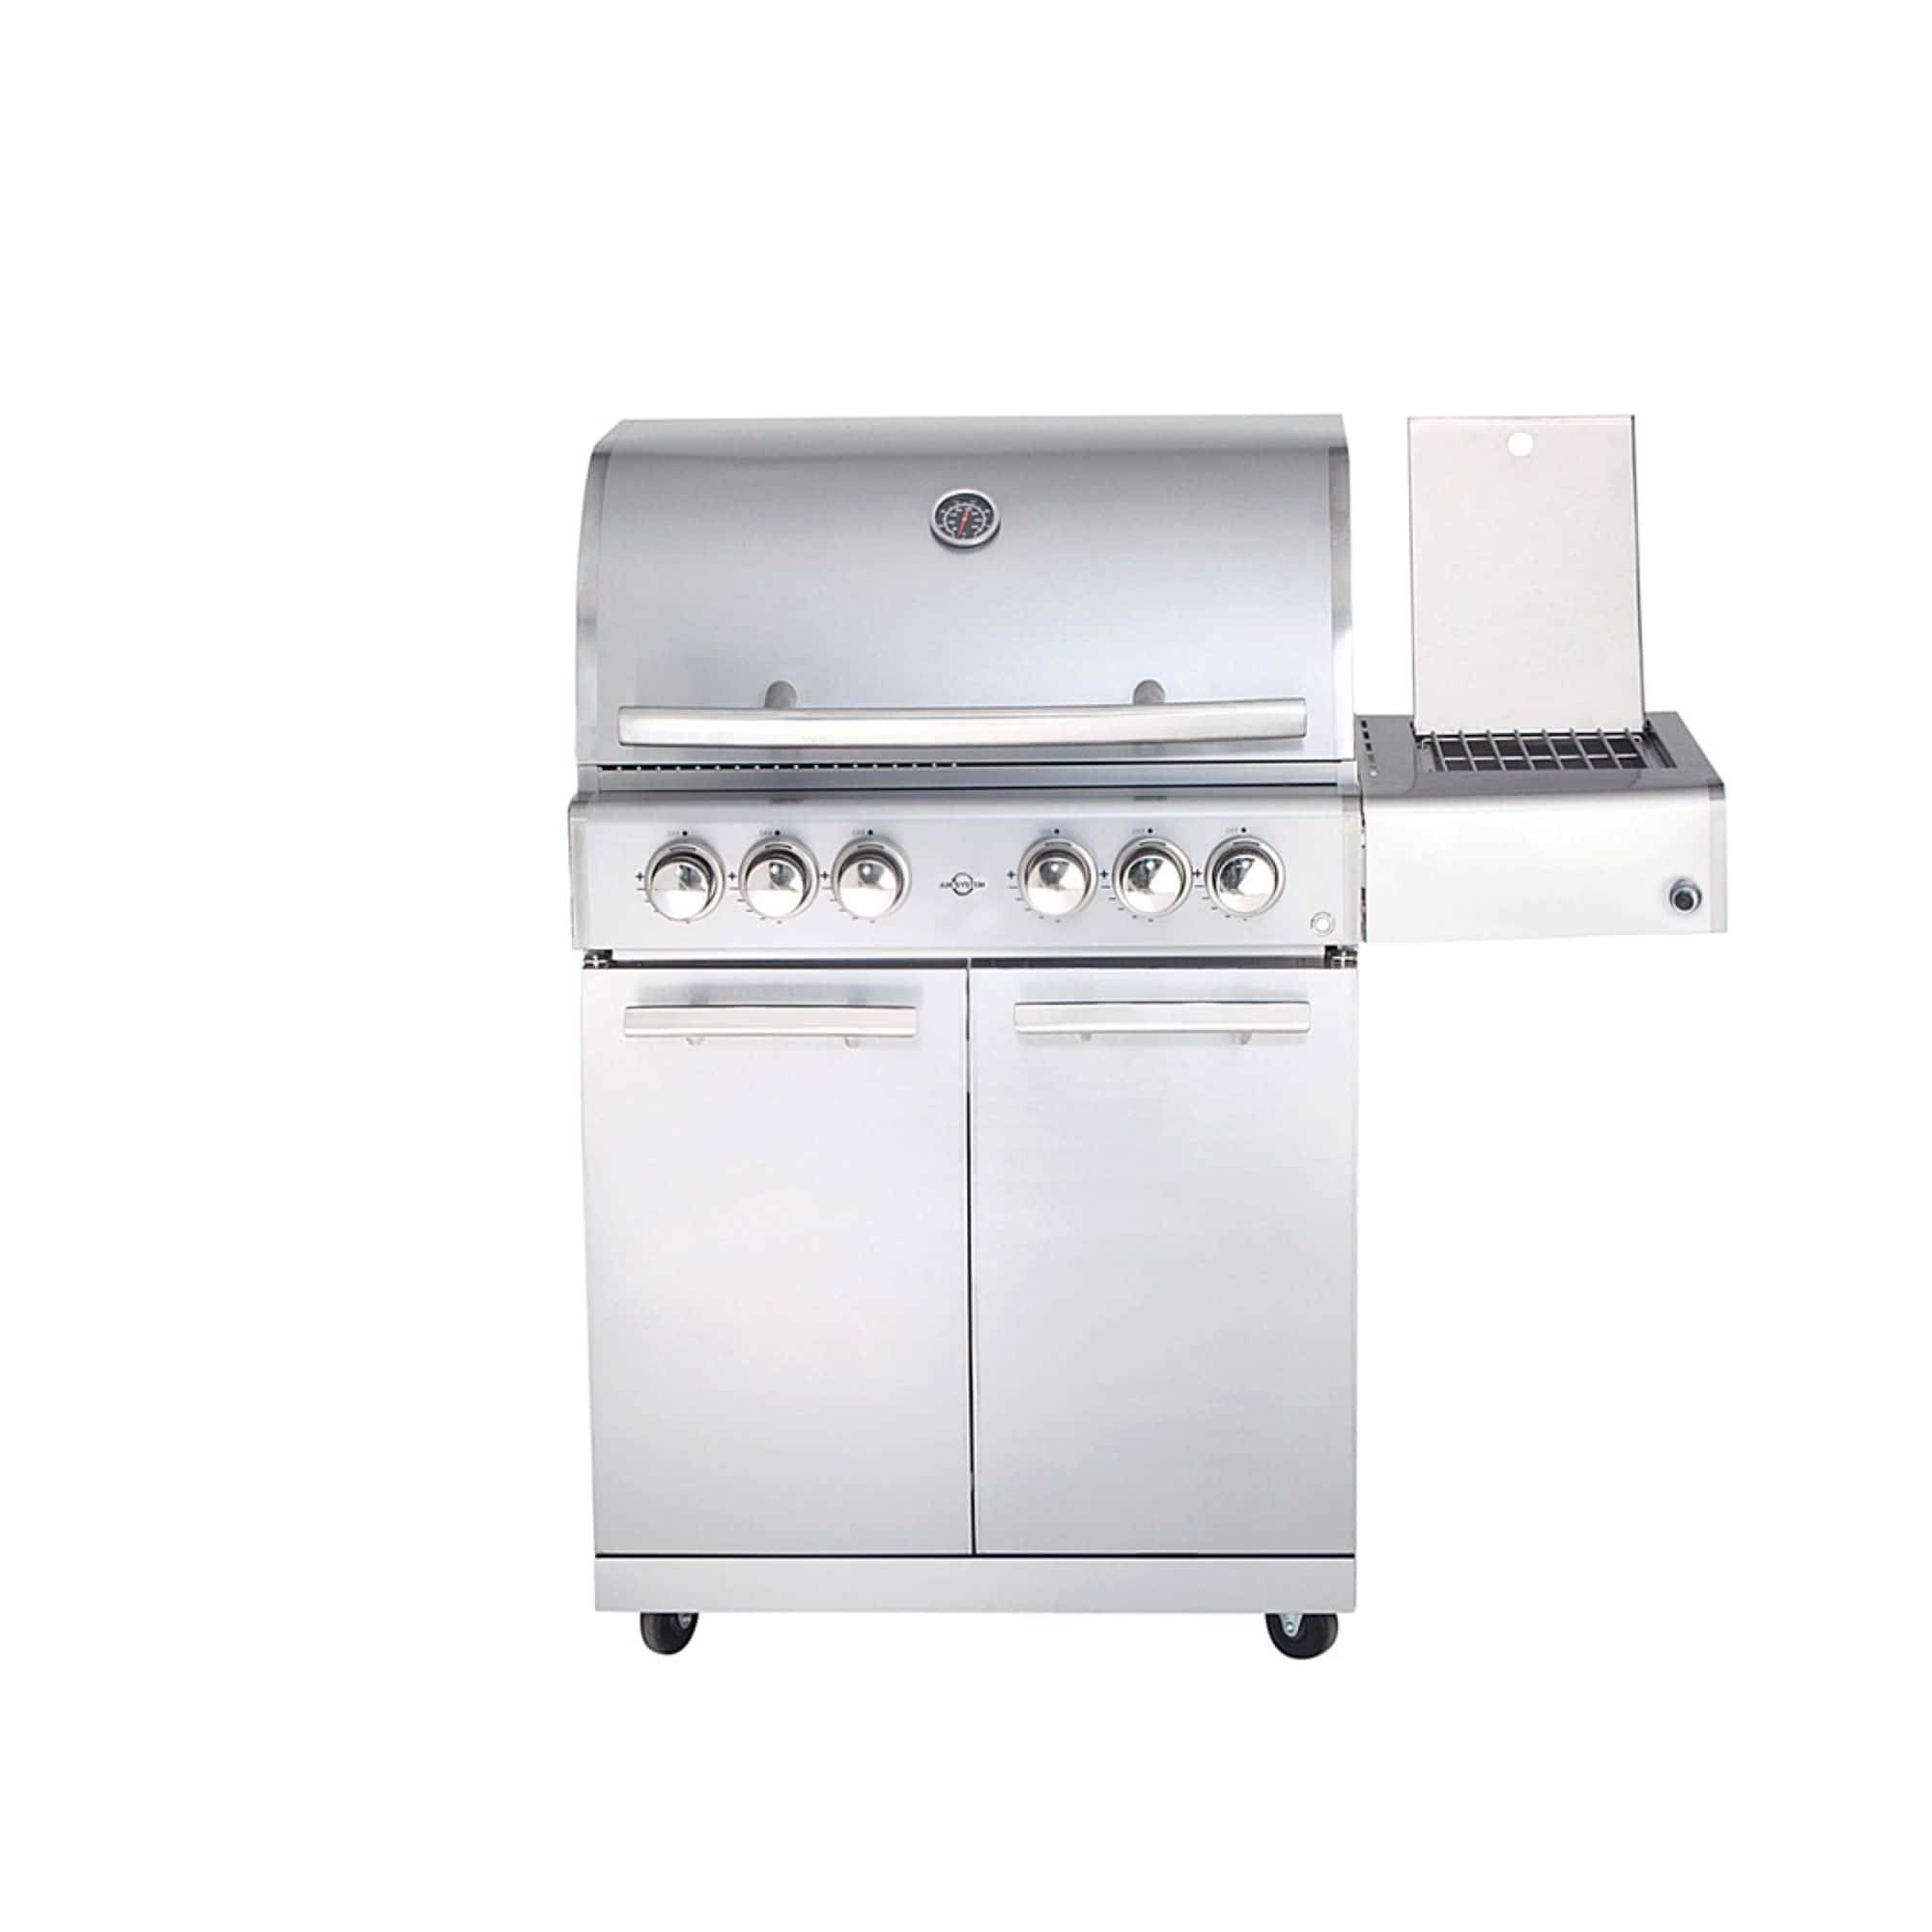 MODULAR-TOP-LINE-ALL'GRILL CHEF L